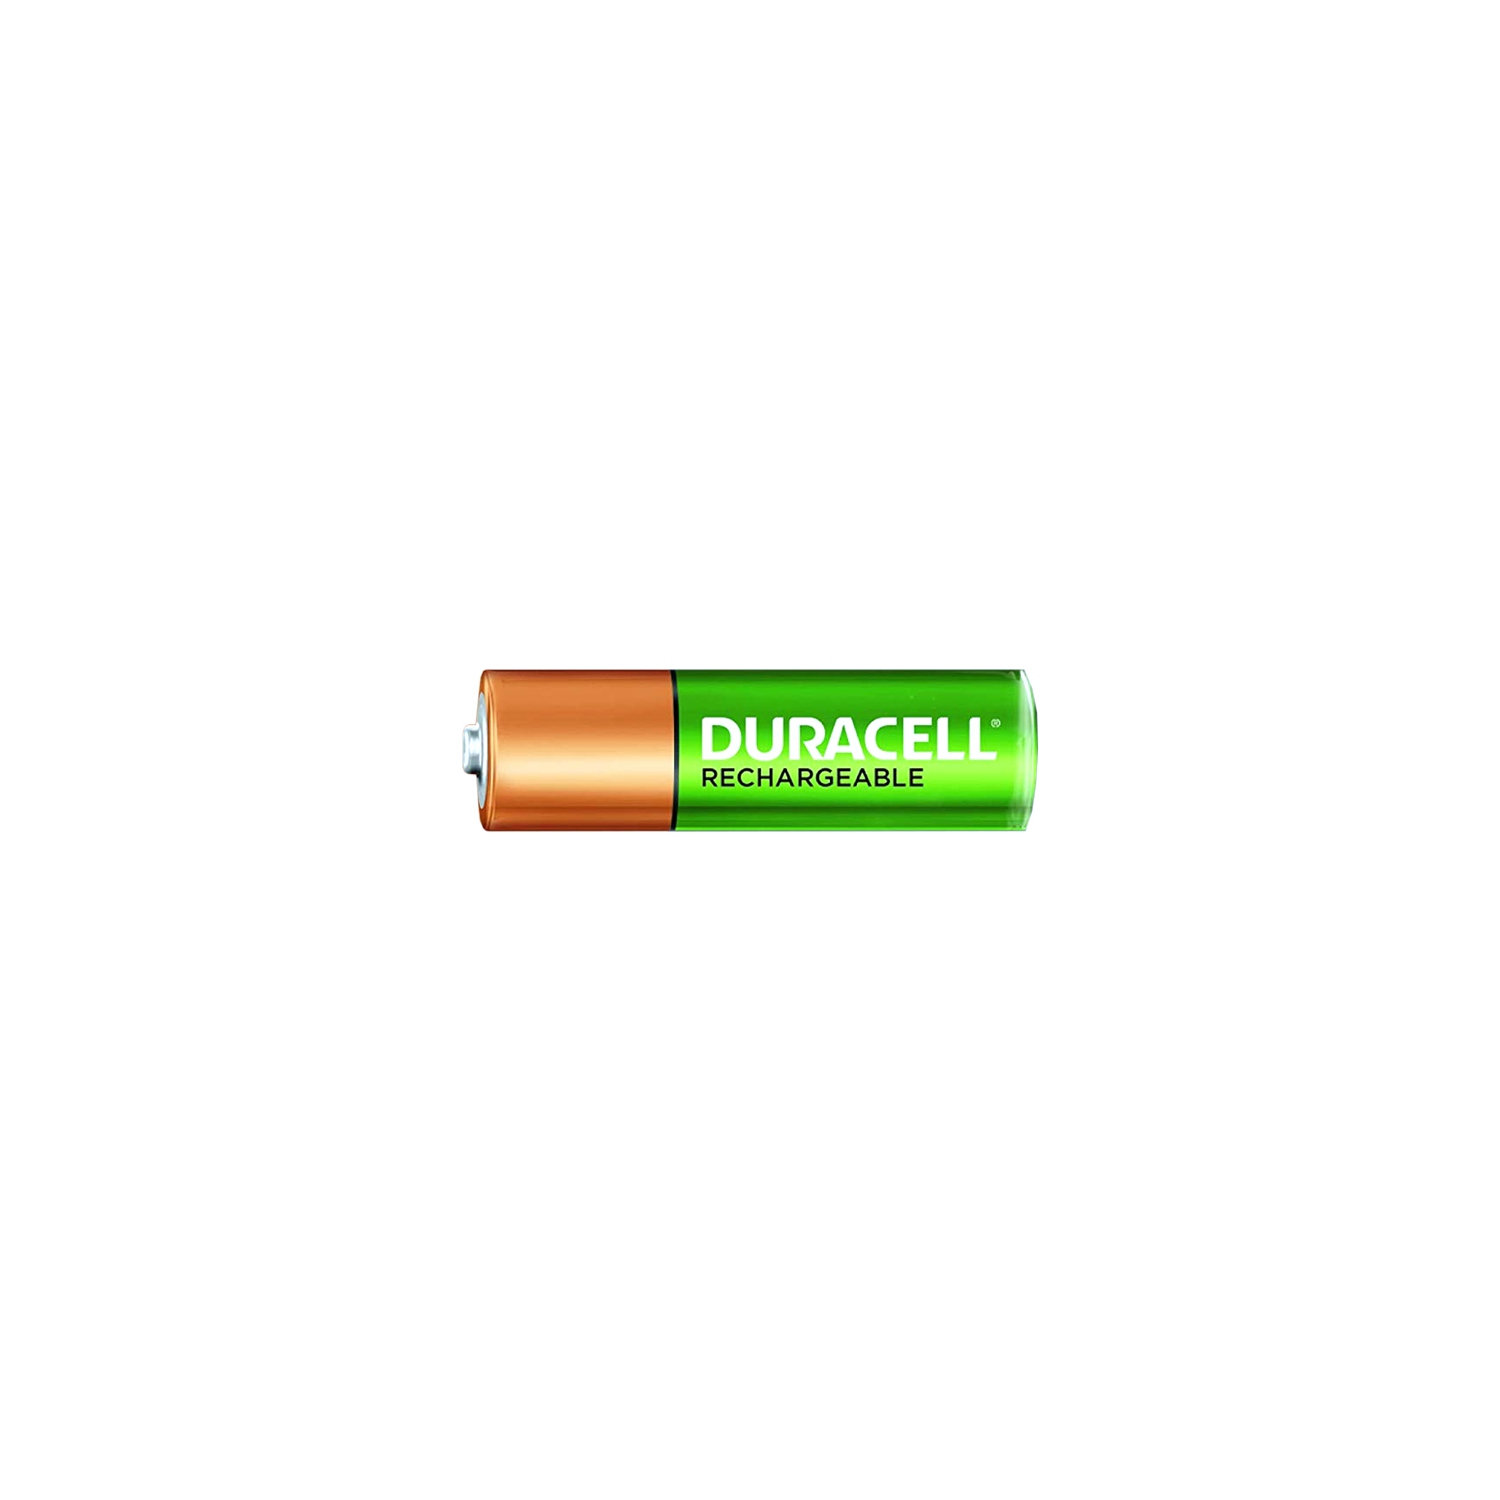 24-Pack AA Duracell Rechargeable (DX1500) Batteries (2500 mAh)